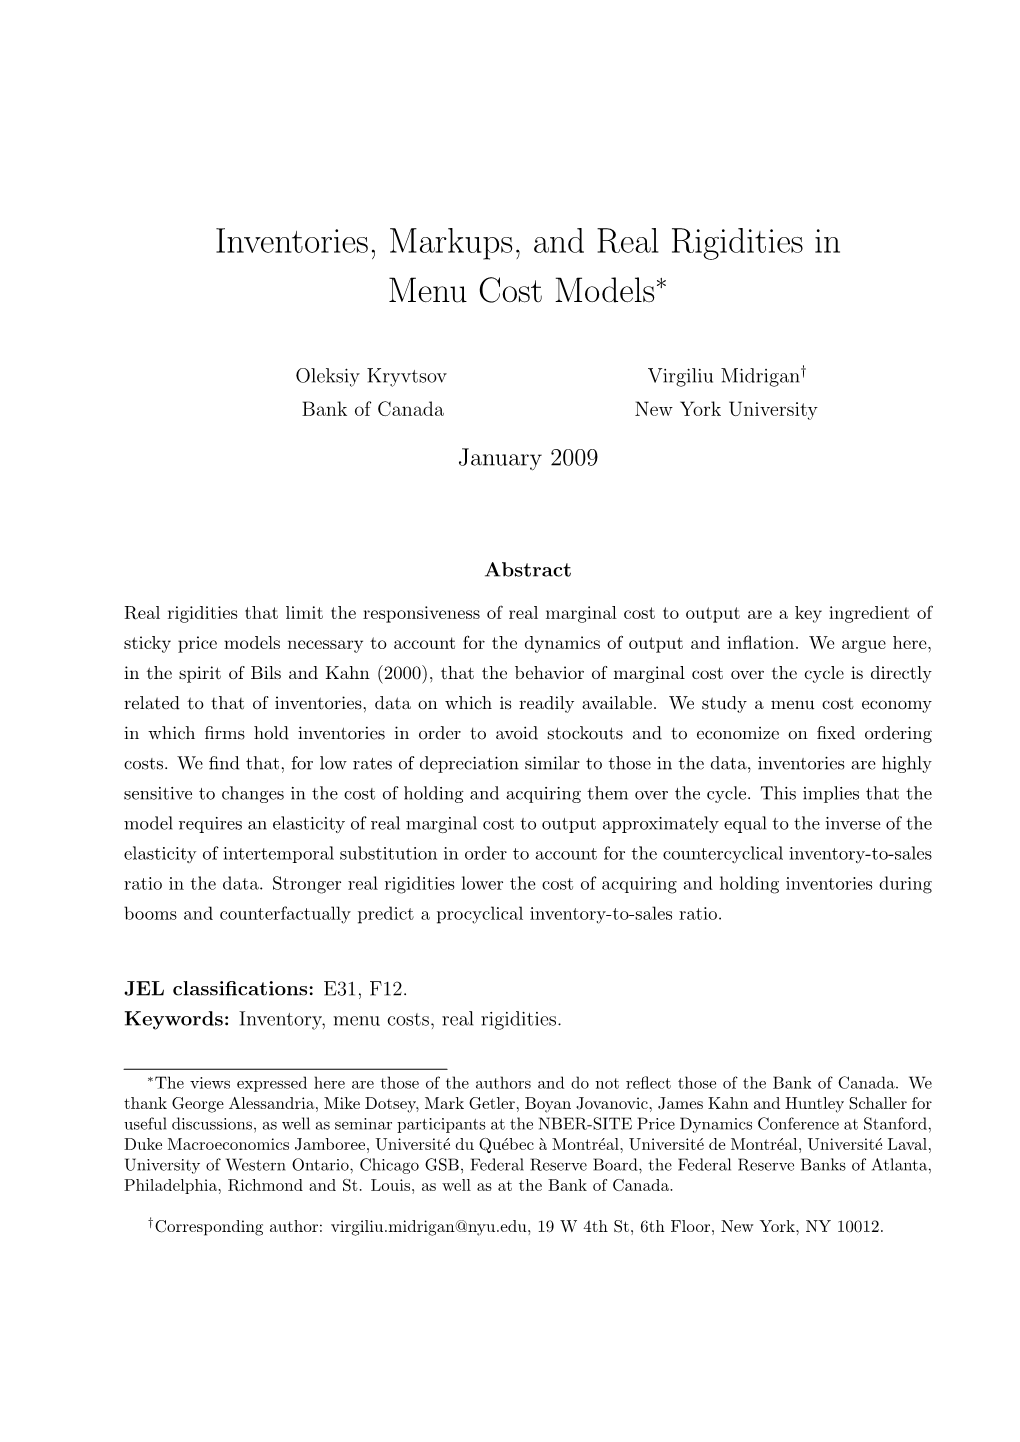 Inventories, Markups, and Real Rigidities in Menu Cost Models∗